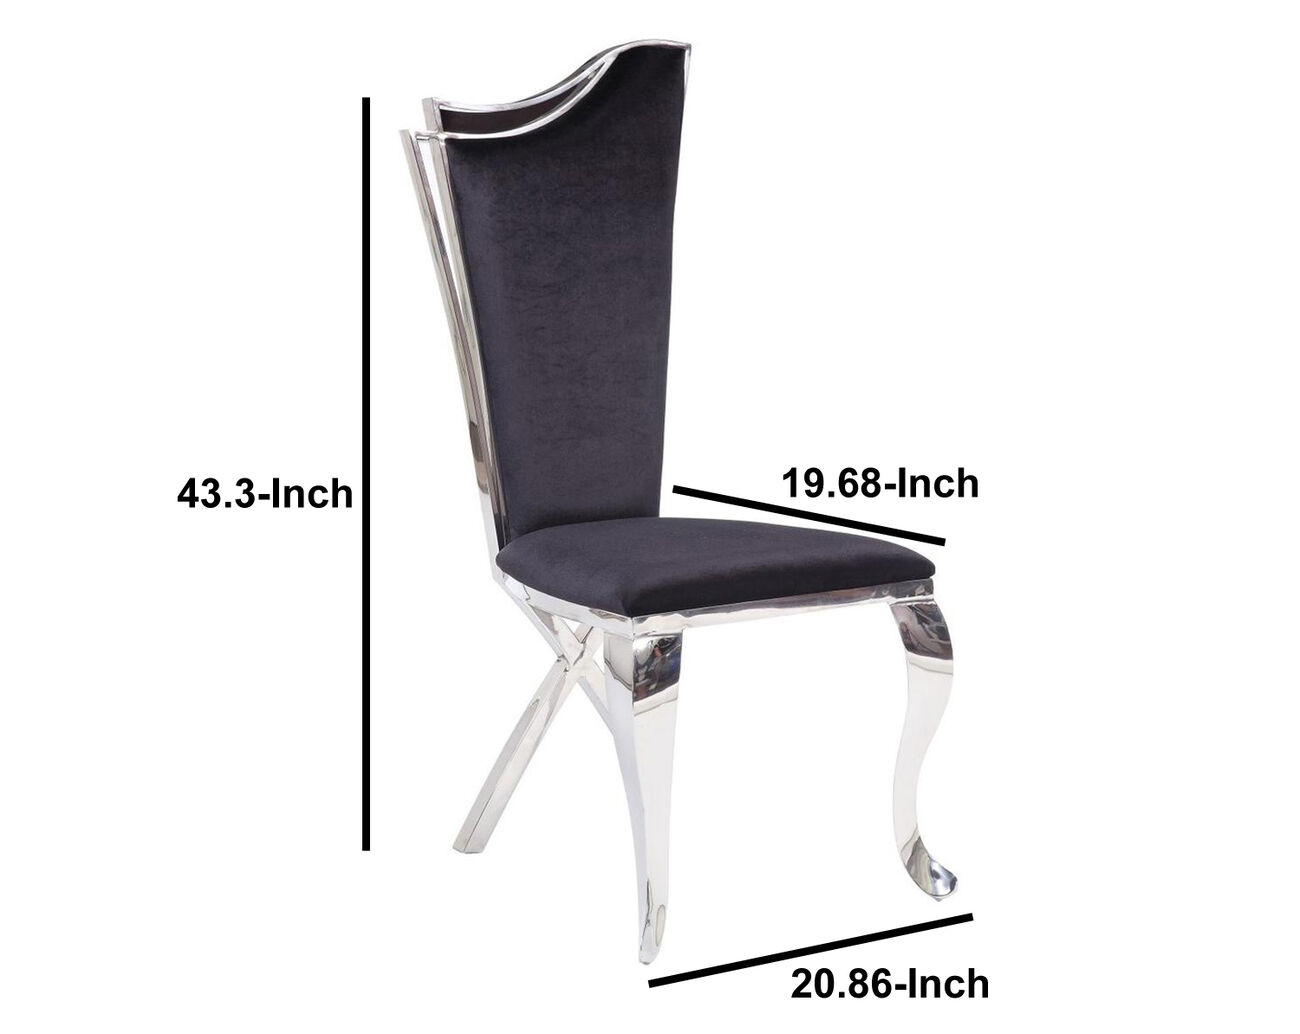 Fabric Upholstered Metal Side Chairs with Asymmetrical Backrest, Silver and Black, Set of Two